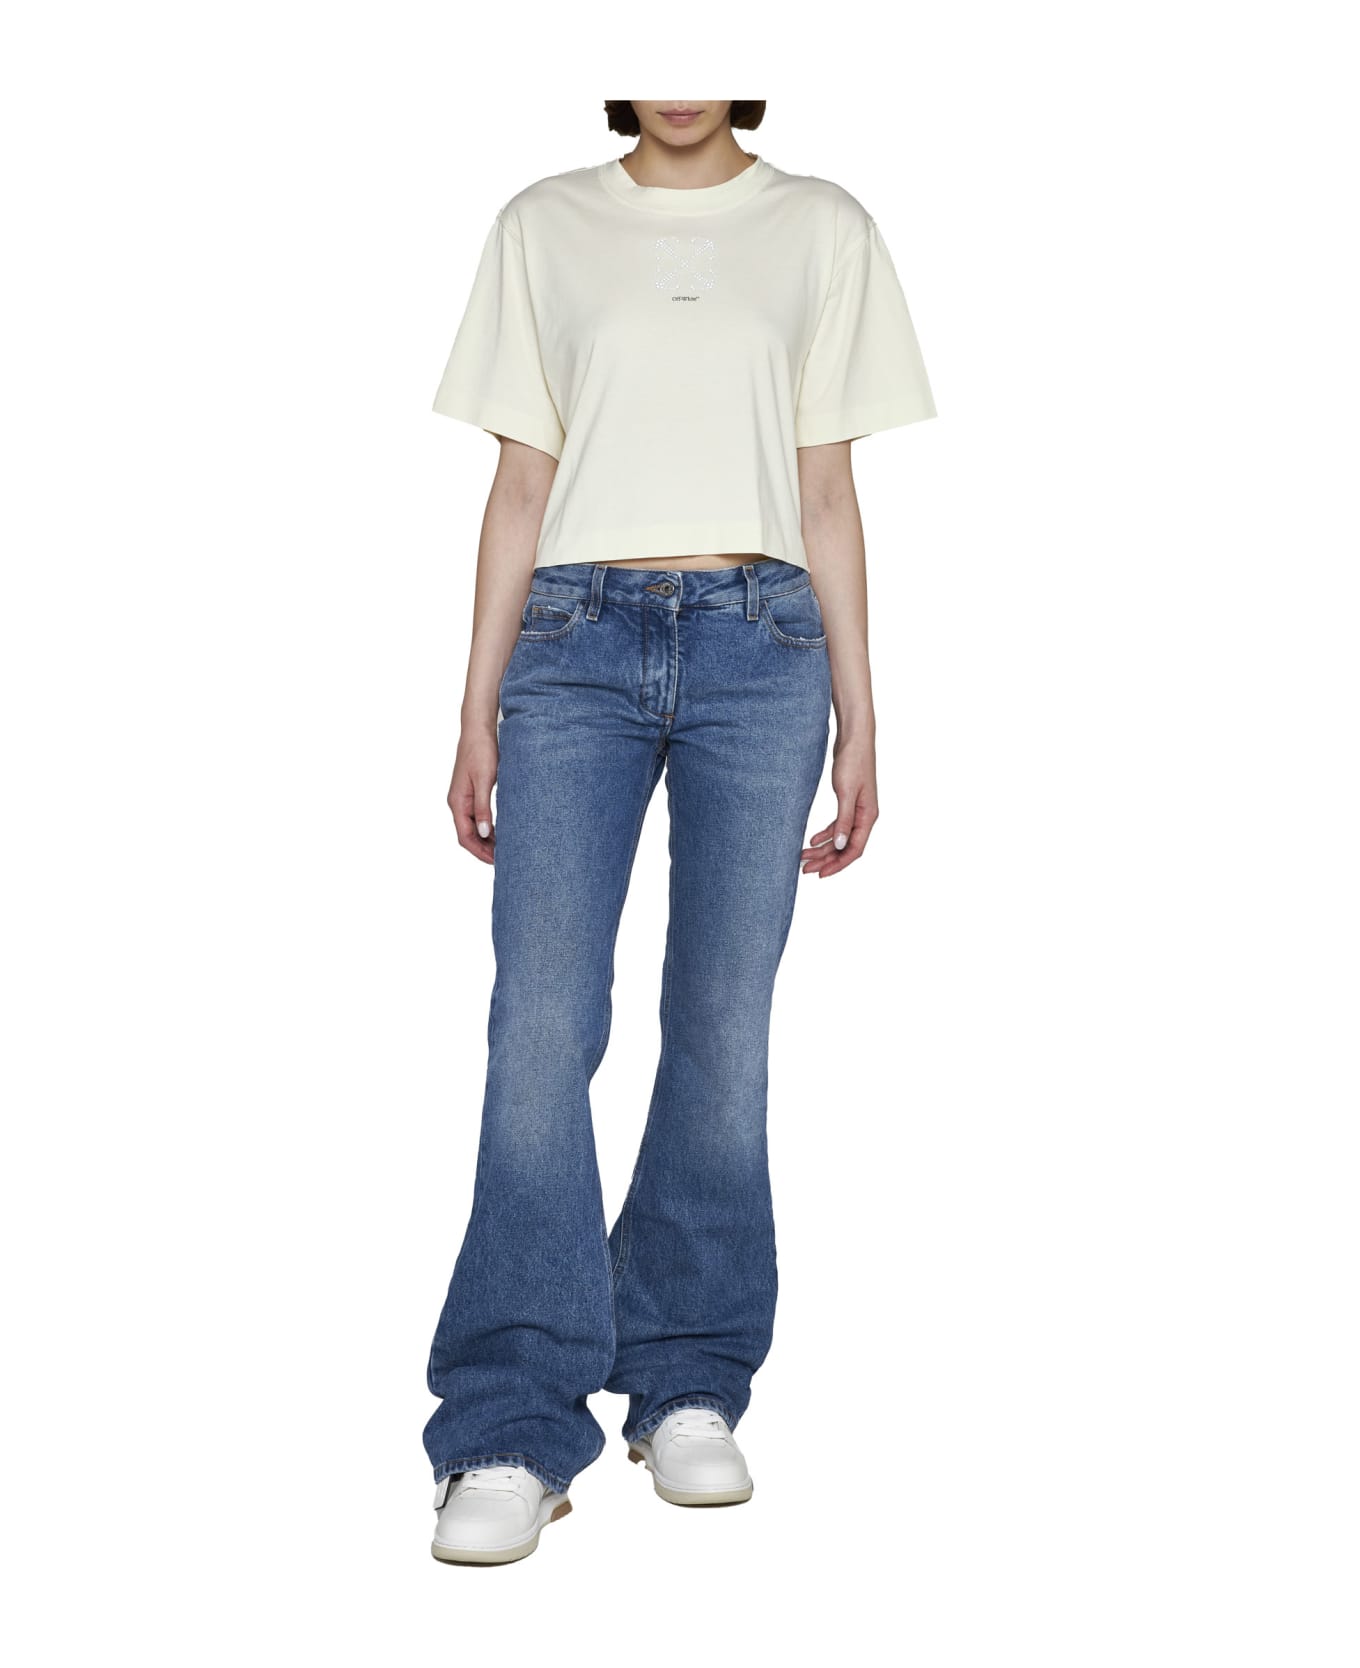 Off-White Pearl Embellished T-shirt - Yellow Tシャツ